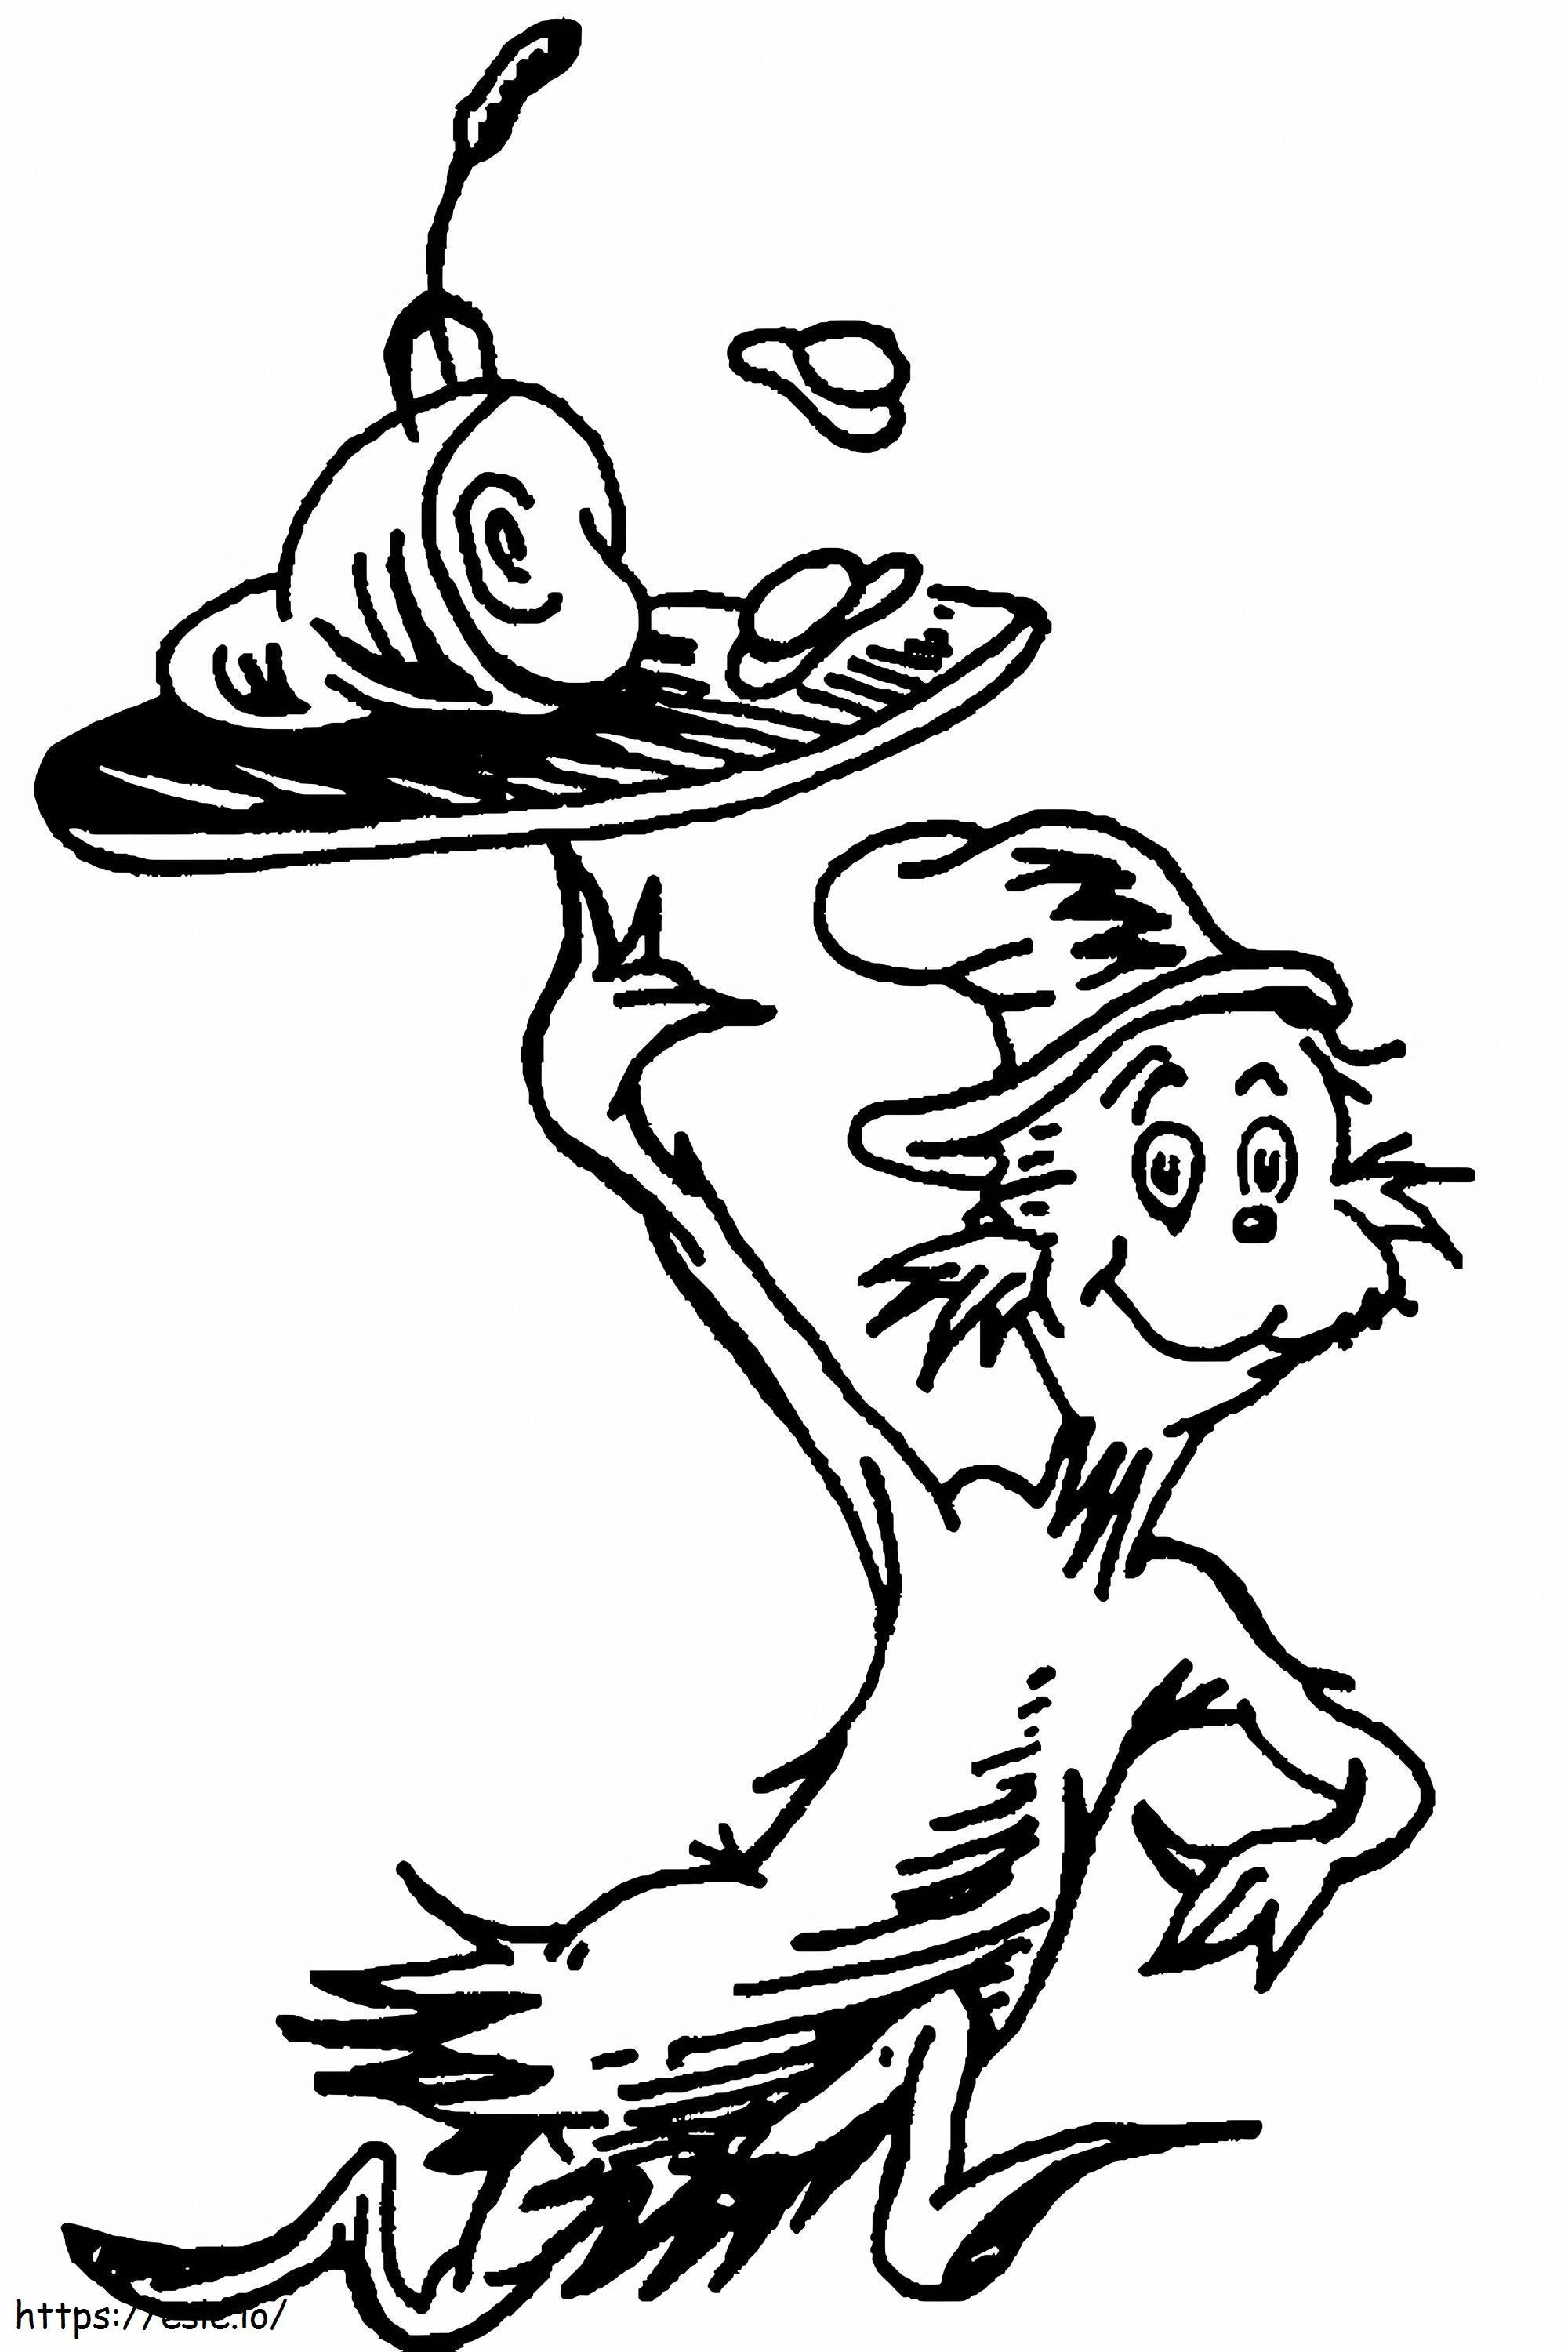 1580719892 Black And White Downloadable Jpg Dr Seuss Clipart coloring page